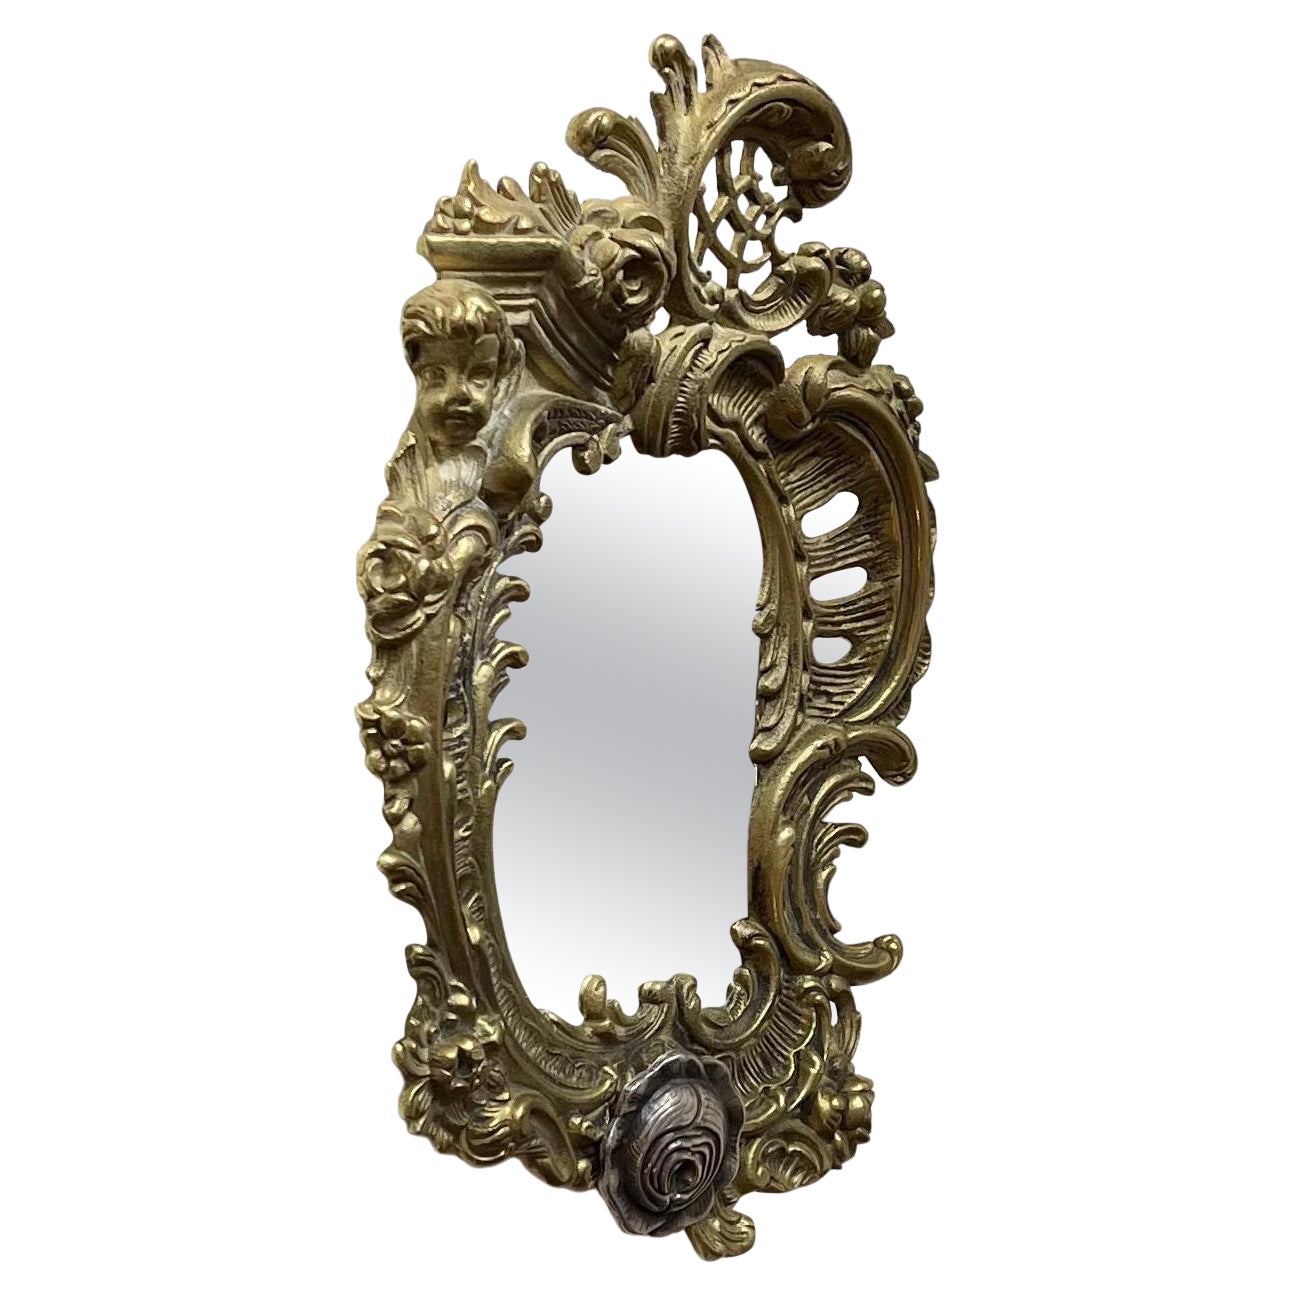 Small Italian Vanity Wall Mirror in Brass and Silver